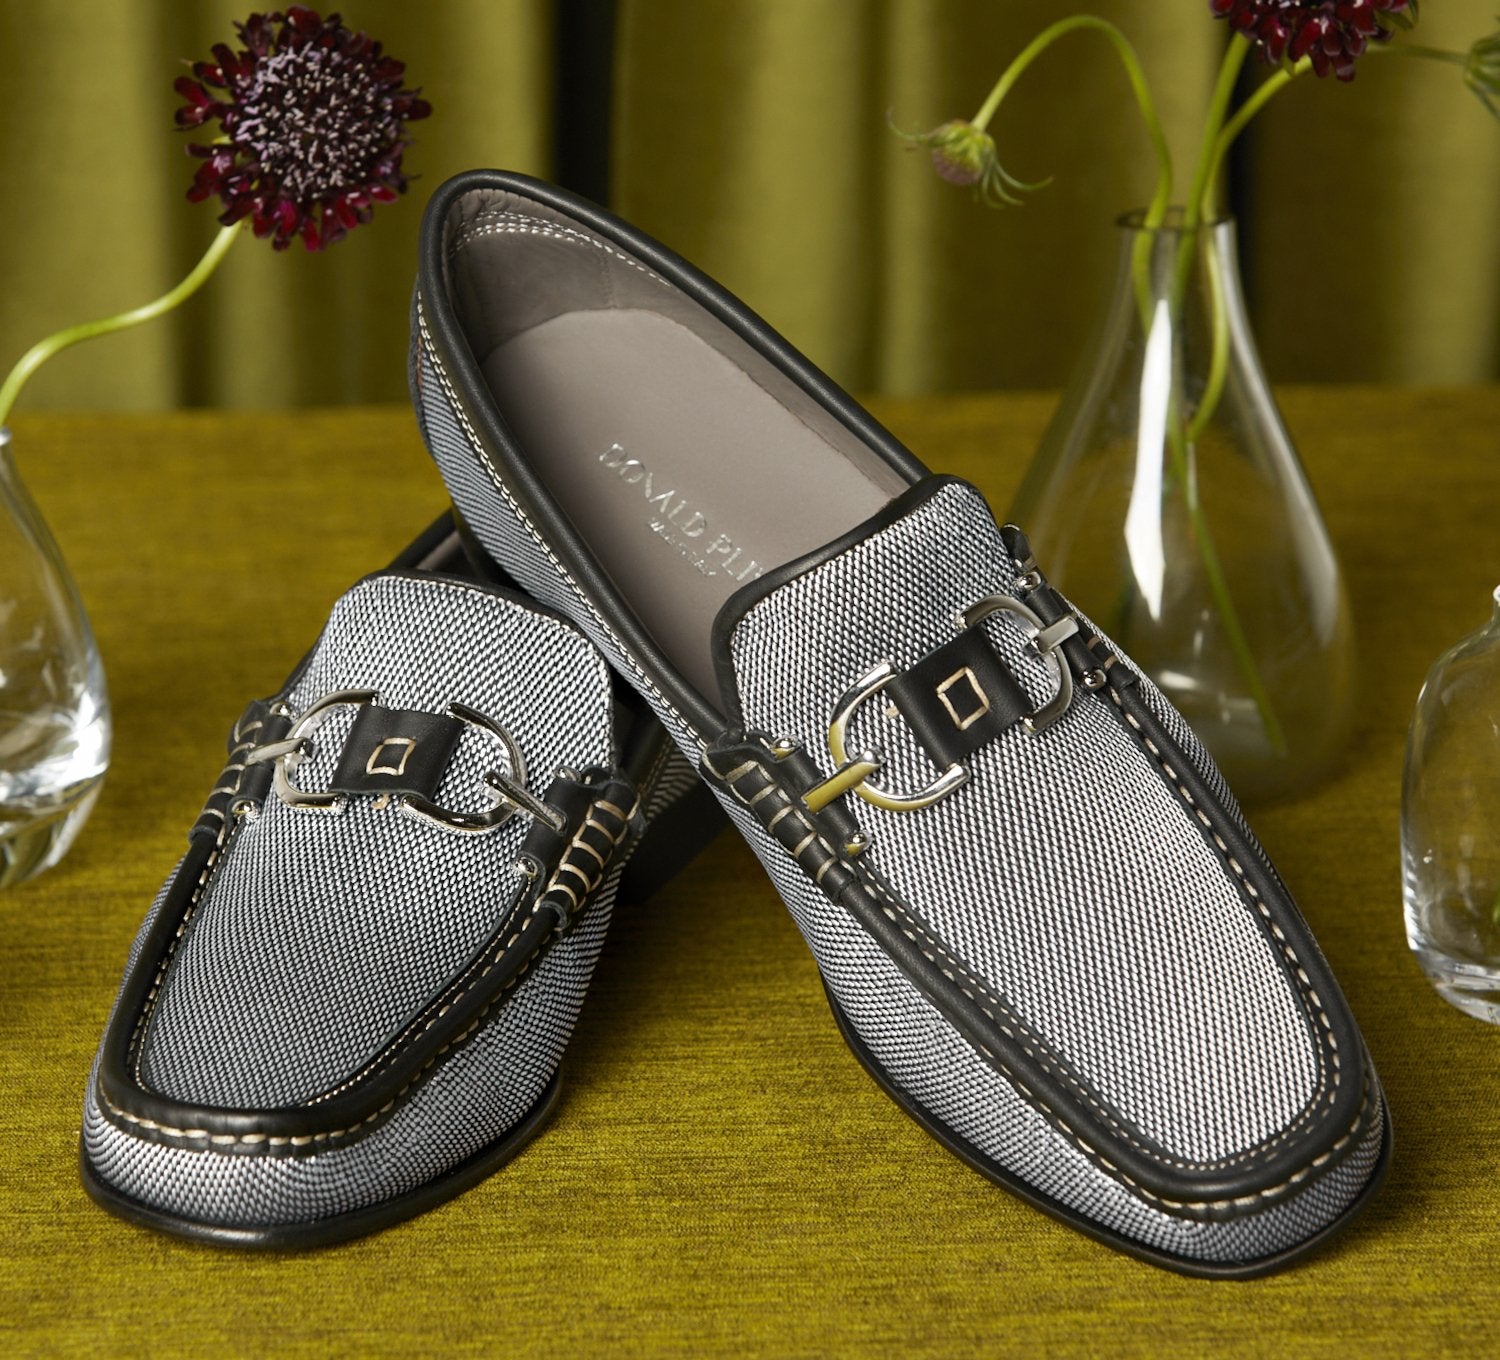 Make a statement with Silver Italian Dacio. This classic Donald Pliner shoe oozes style and fashion with its textured canvas outer mixing dark charcoal and silver, leather trim, signature Pliner hardware, and a leather sole. Its light grey color with dark charcoal trim will lend a sophisticated touch to any outfit.